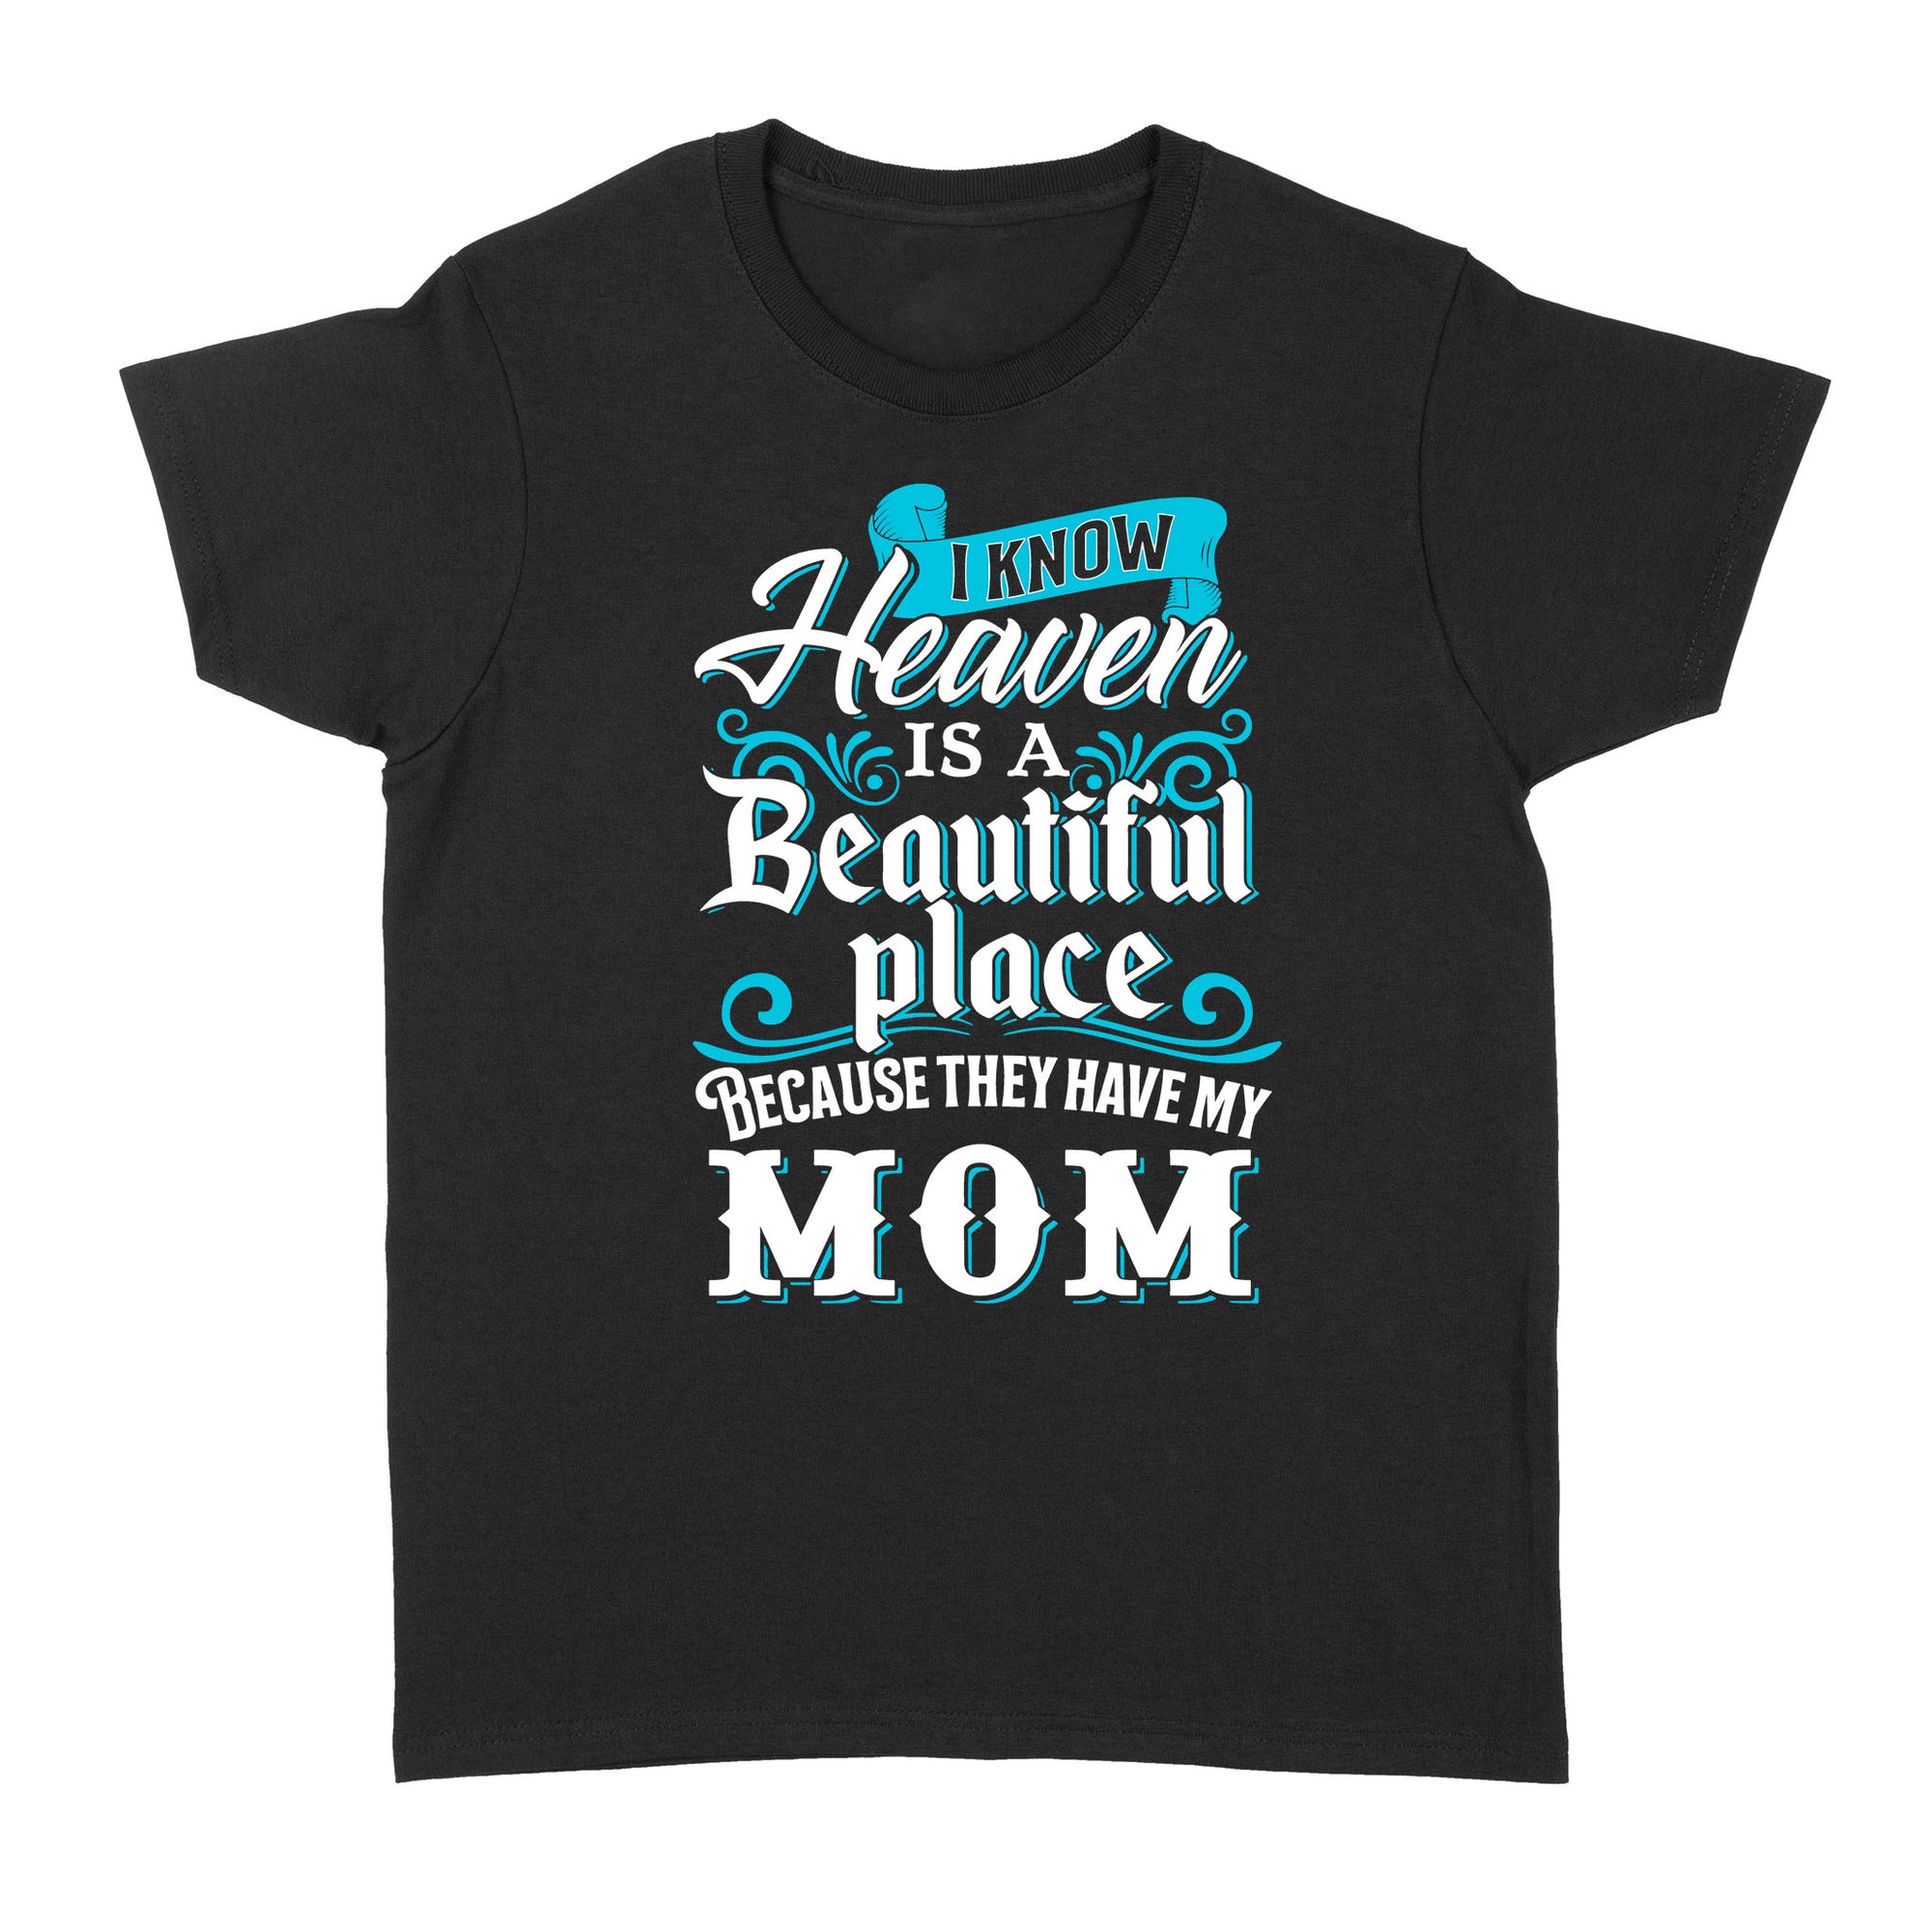 Gift Ideas for Daughter I Know Heaven Is A Beatiful Place Because They Have My Mom, Mother's Day Gift (2) - Standard Women's T-shirt